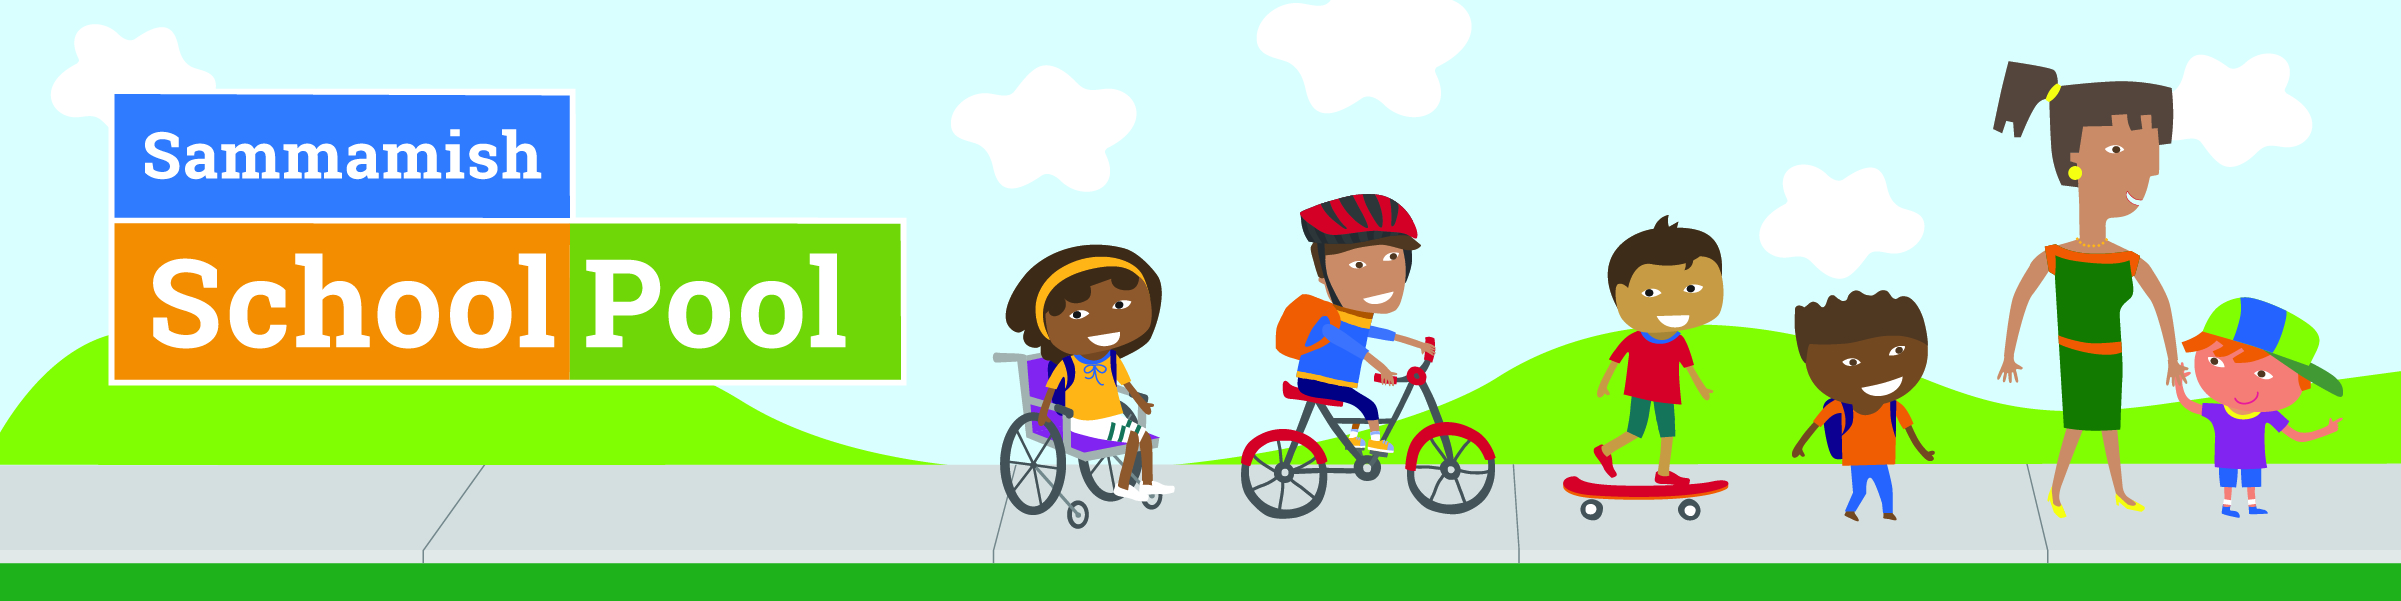 Children getting to school via walking, skateboarding, bicycling, and wheelchair.